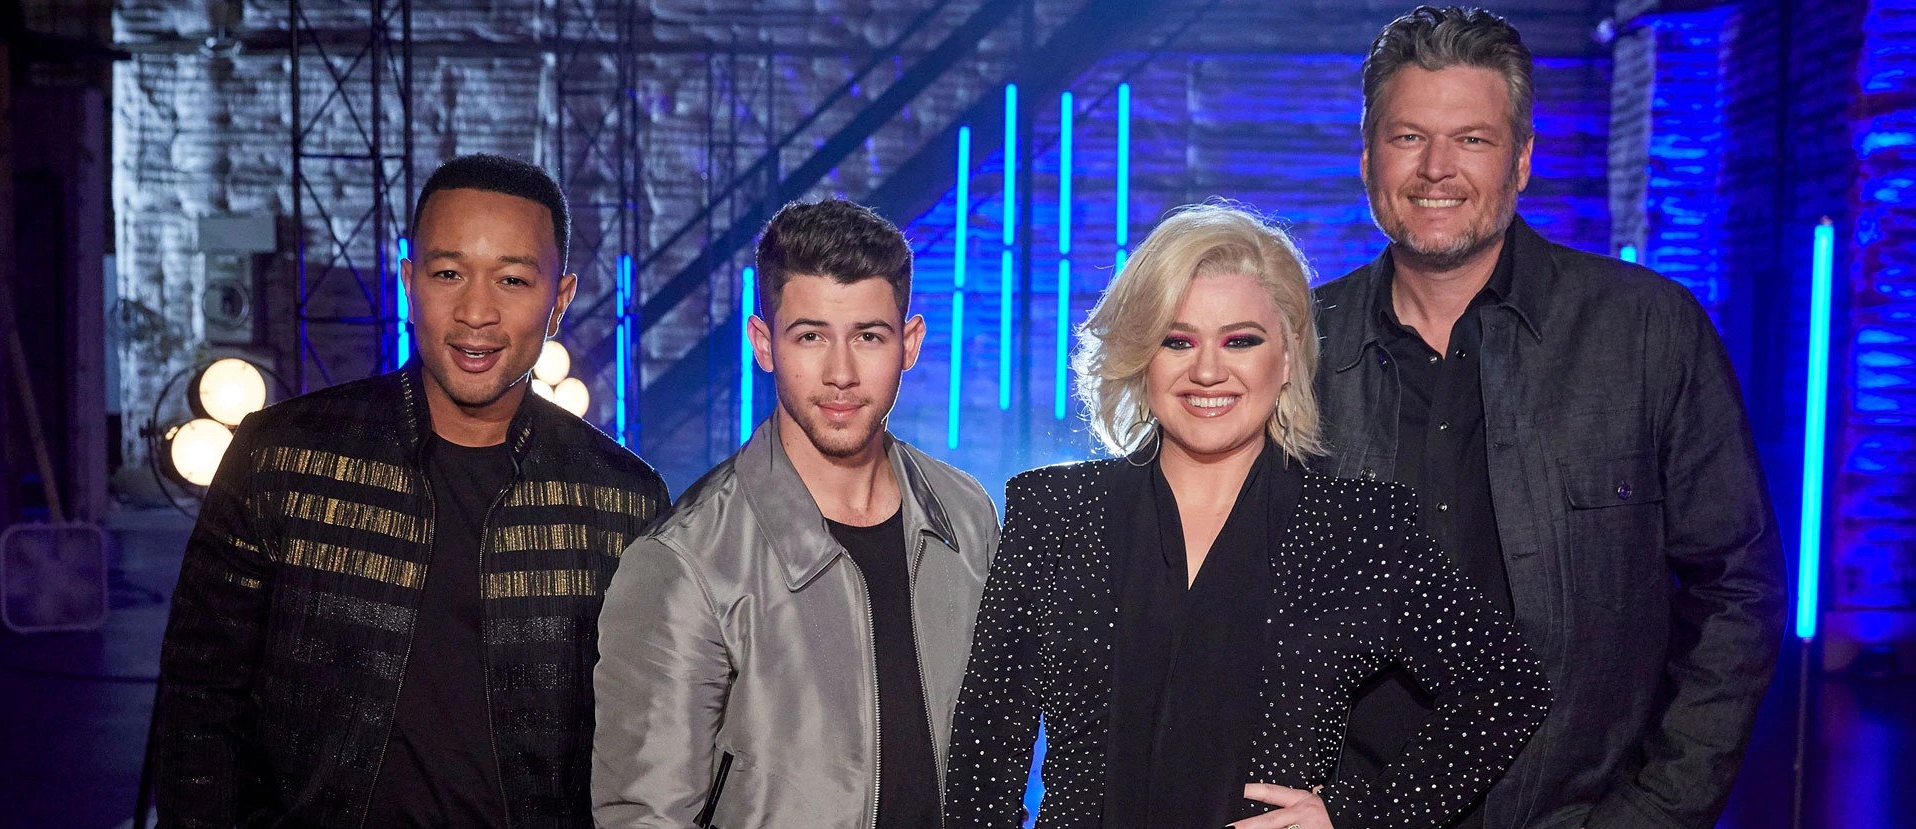 The Voice Season 18 Finale: When and Where to Watch?